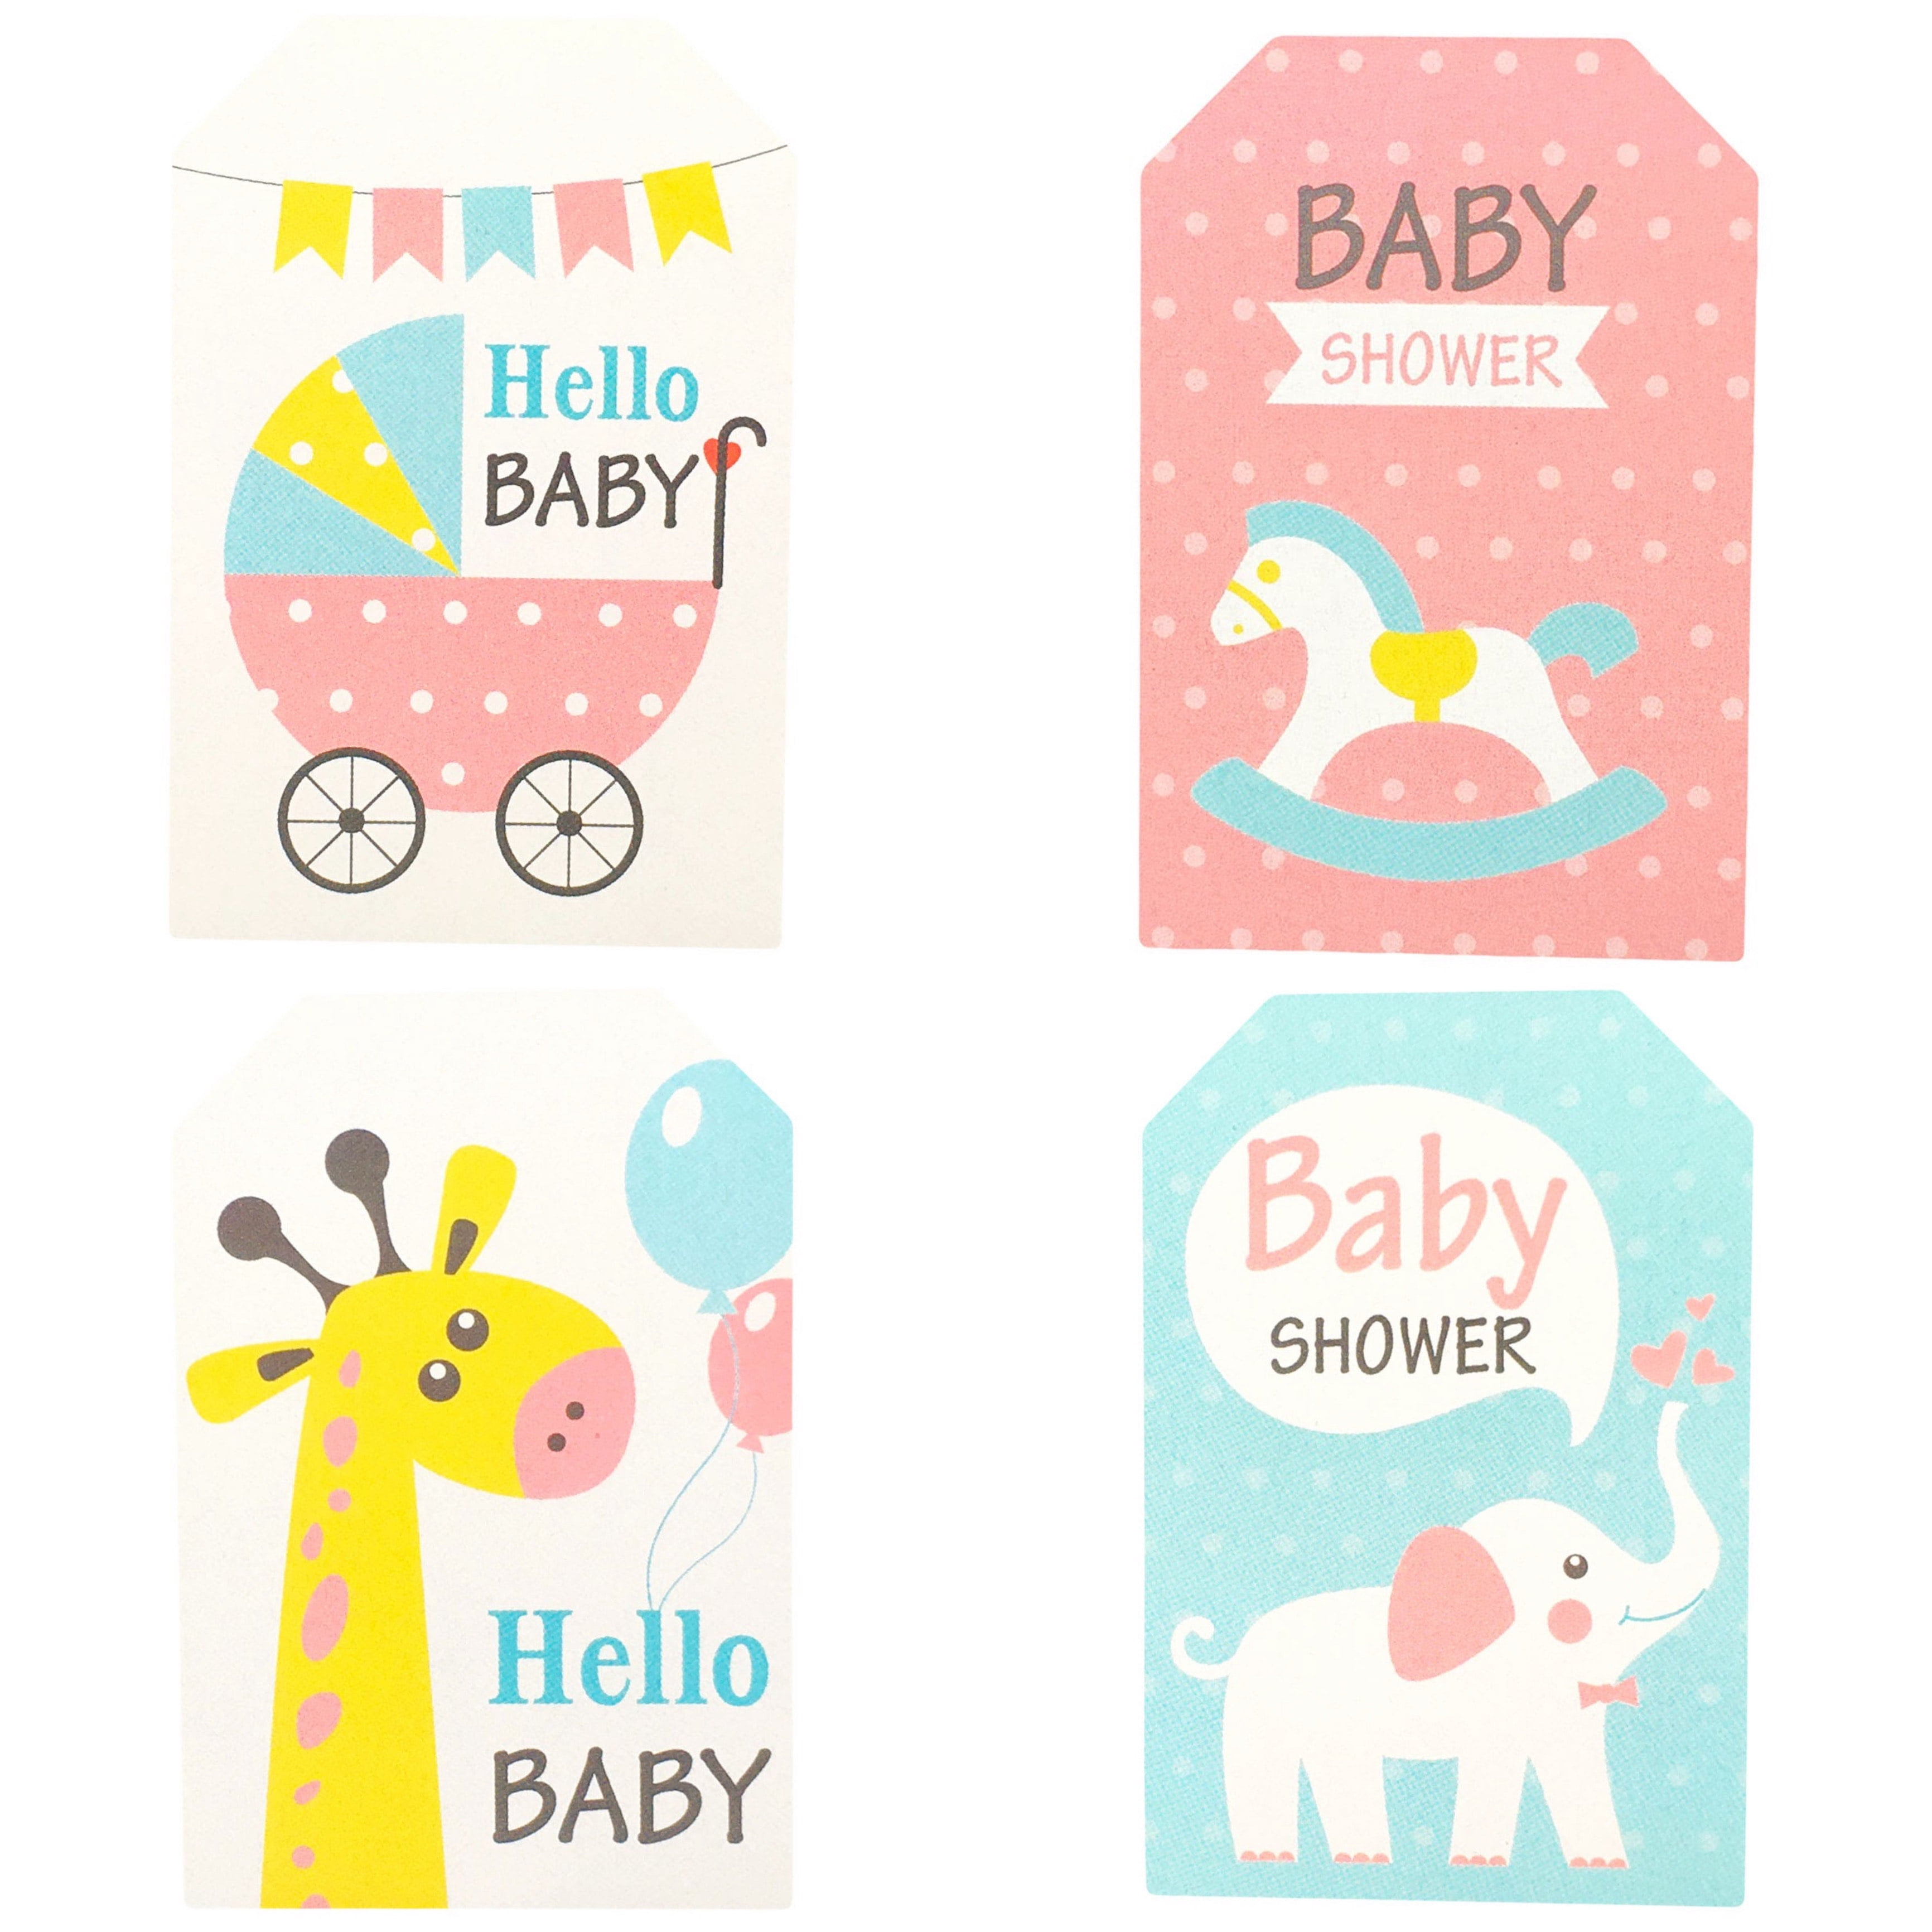 20 ELEPHANT BABY SHOWER FAVORS STICKERS LABELS for lollipops etc goody bags 